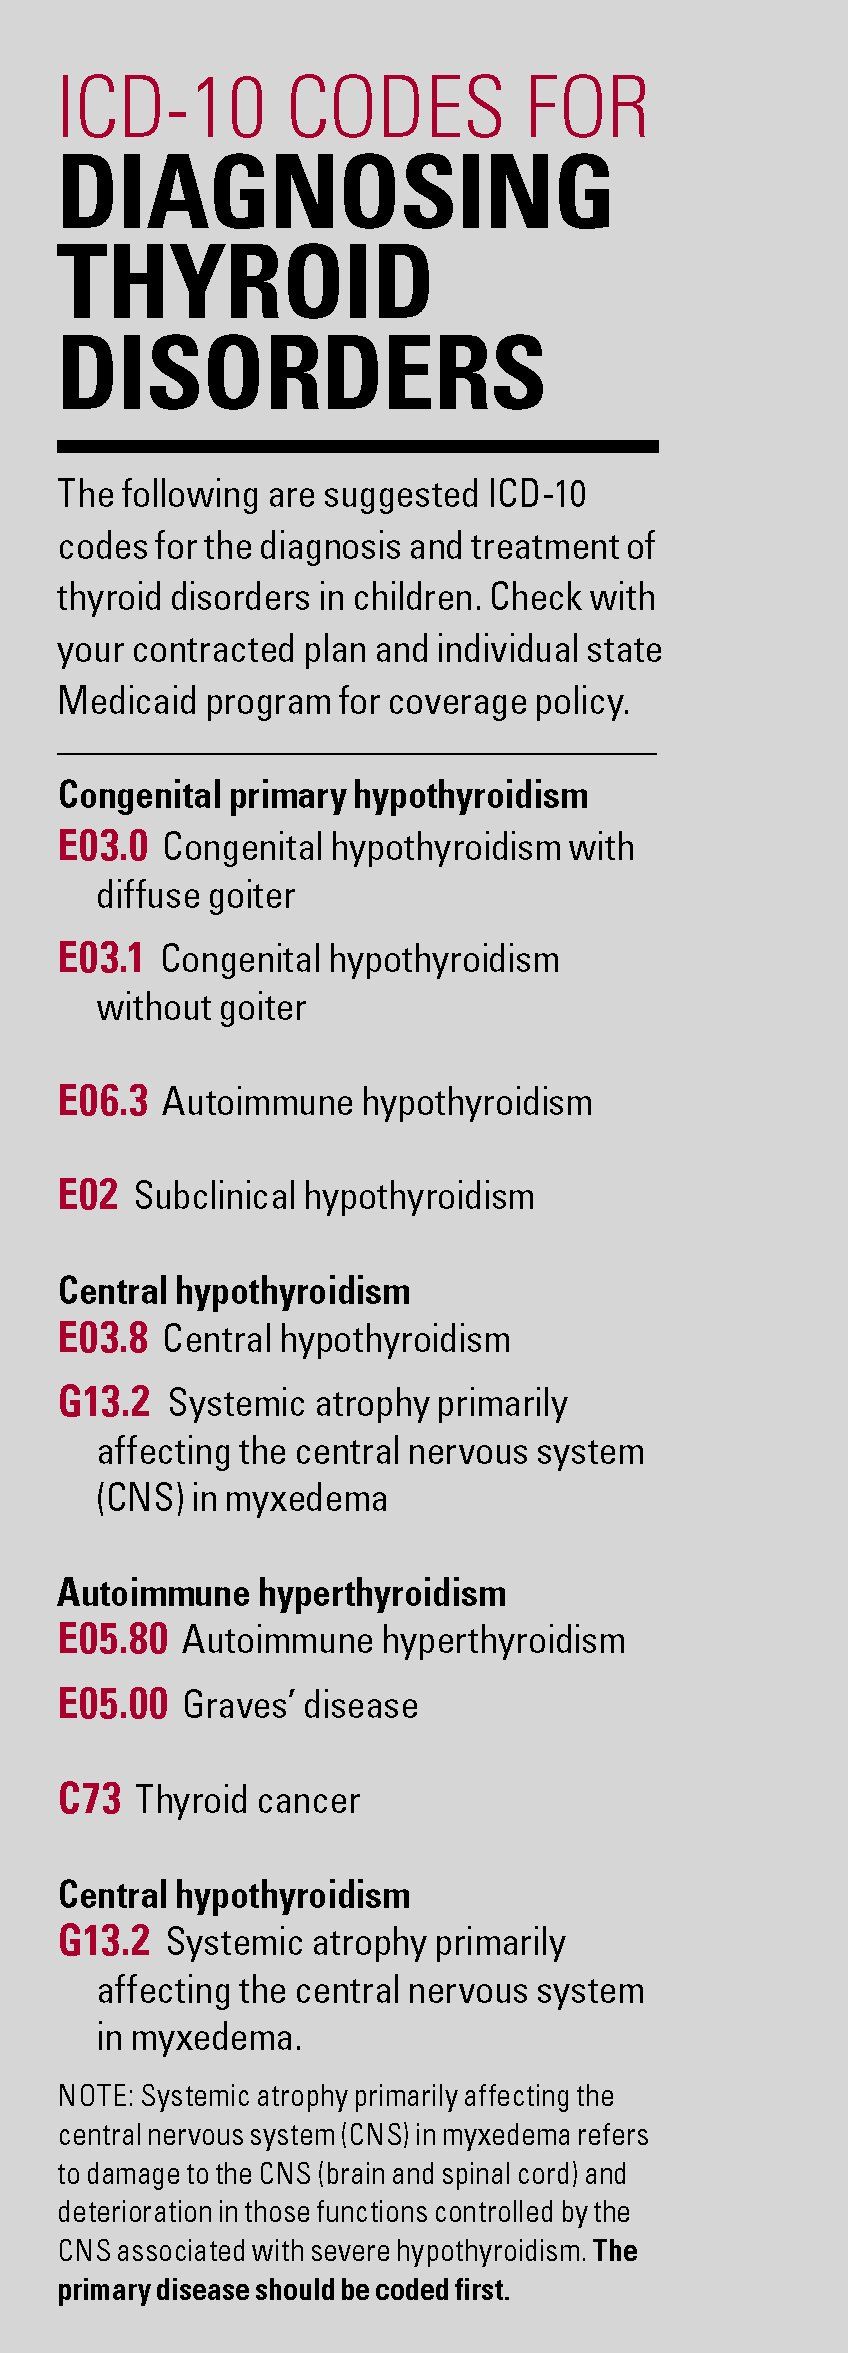 ICD-10 codes for diagnosing thyroid disorders